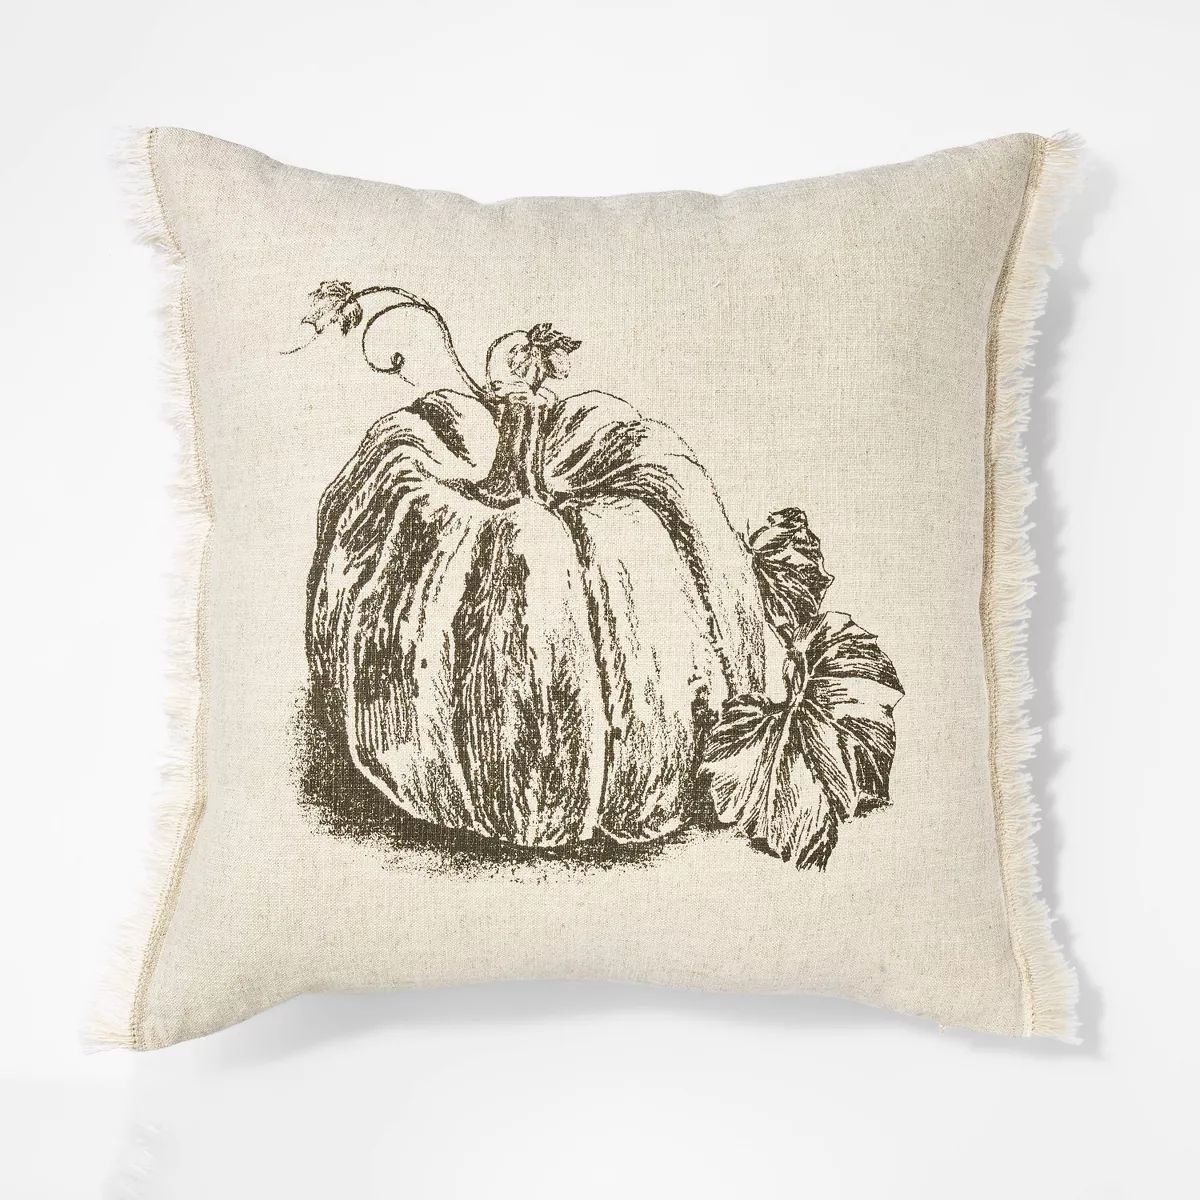 Oversize Printed Pumpkin Square Throw Pillow - Threshold™ designed with Studio McGee | Target